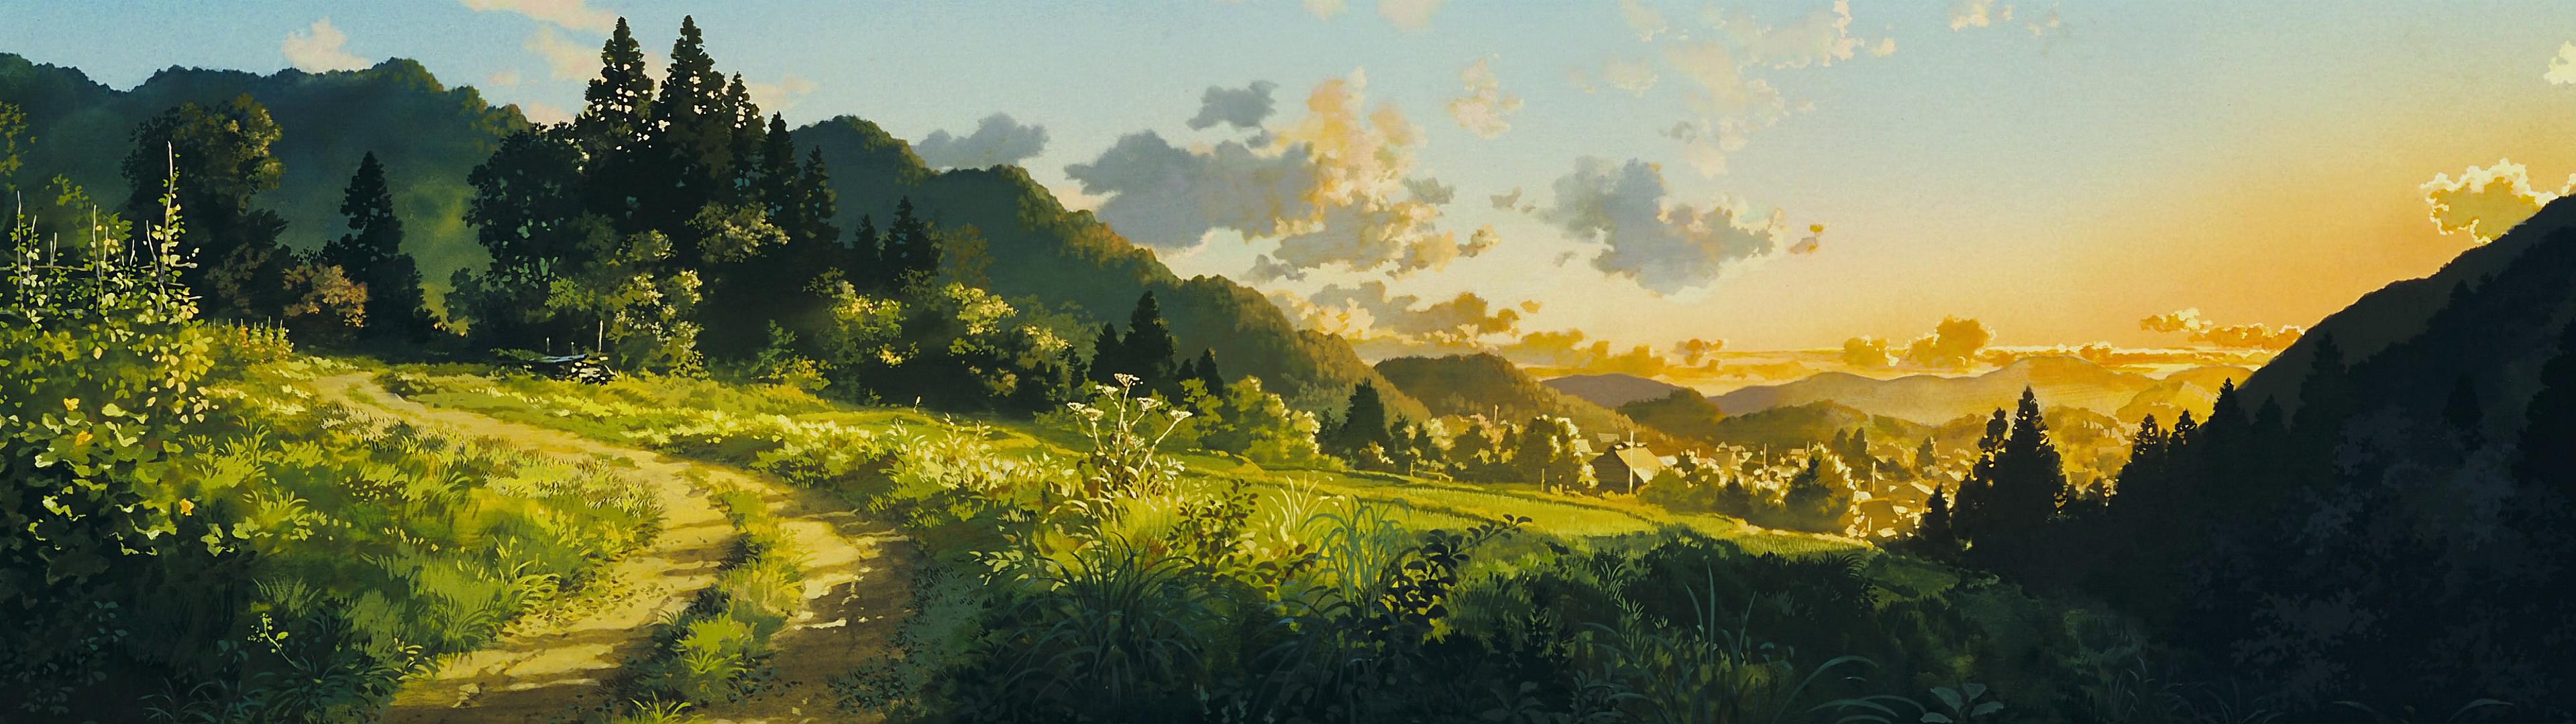 Leave A Reply Cancel Reply - Studio Ghibli Background Paintings , HD Wallpaper & Backgrounds